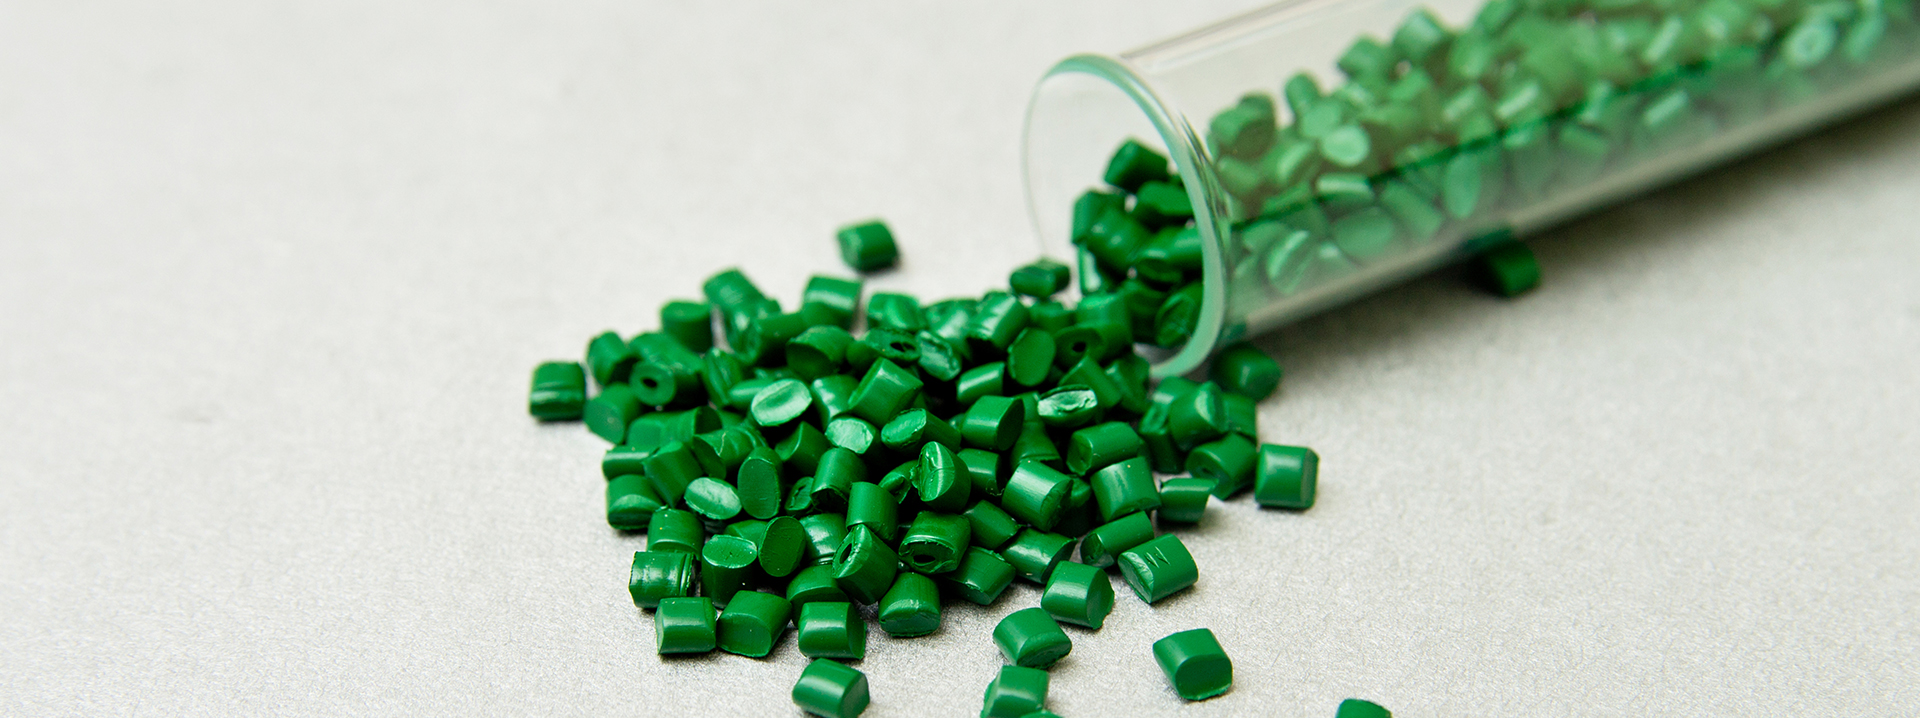 Pigment Green for Plastic Master Batches